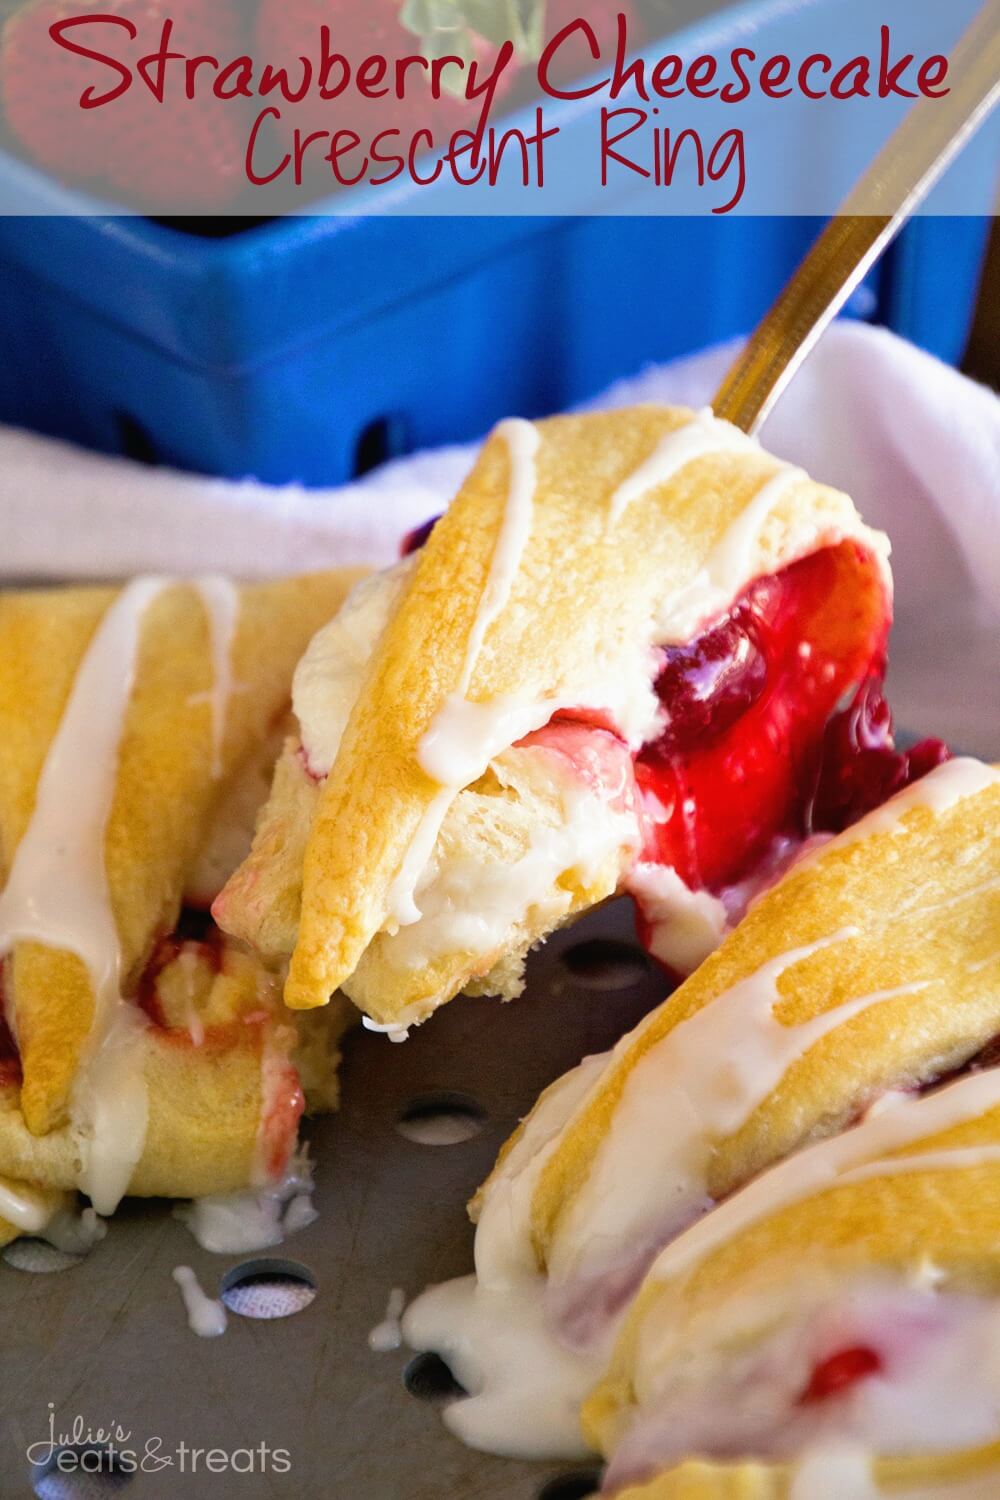 Strawberry Cheesecake Crescent Ring from Julie's Eats and Treats